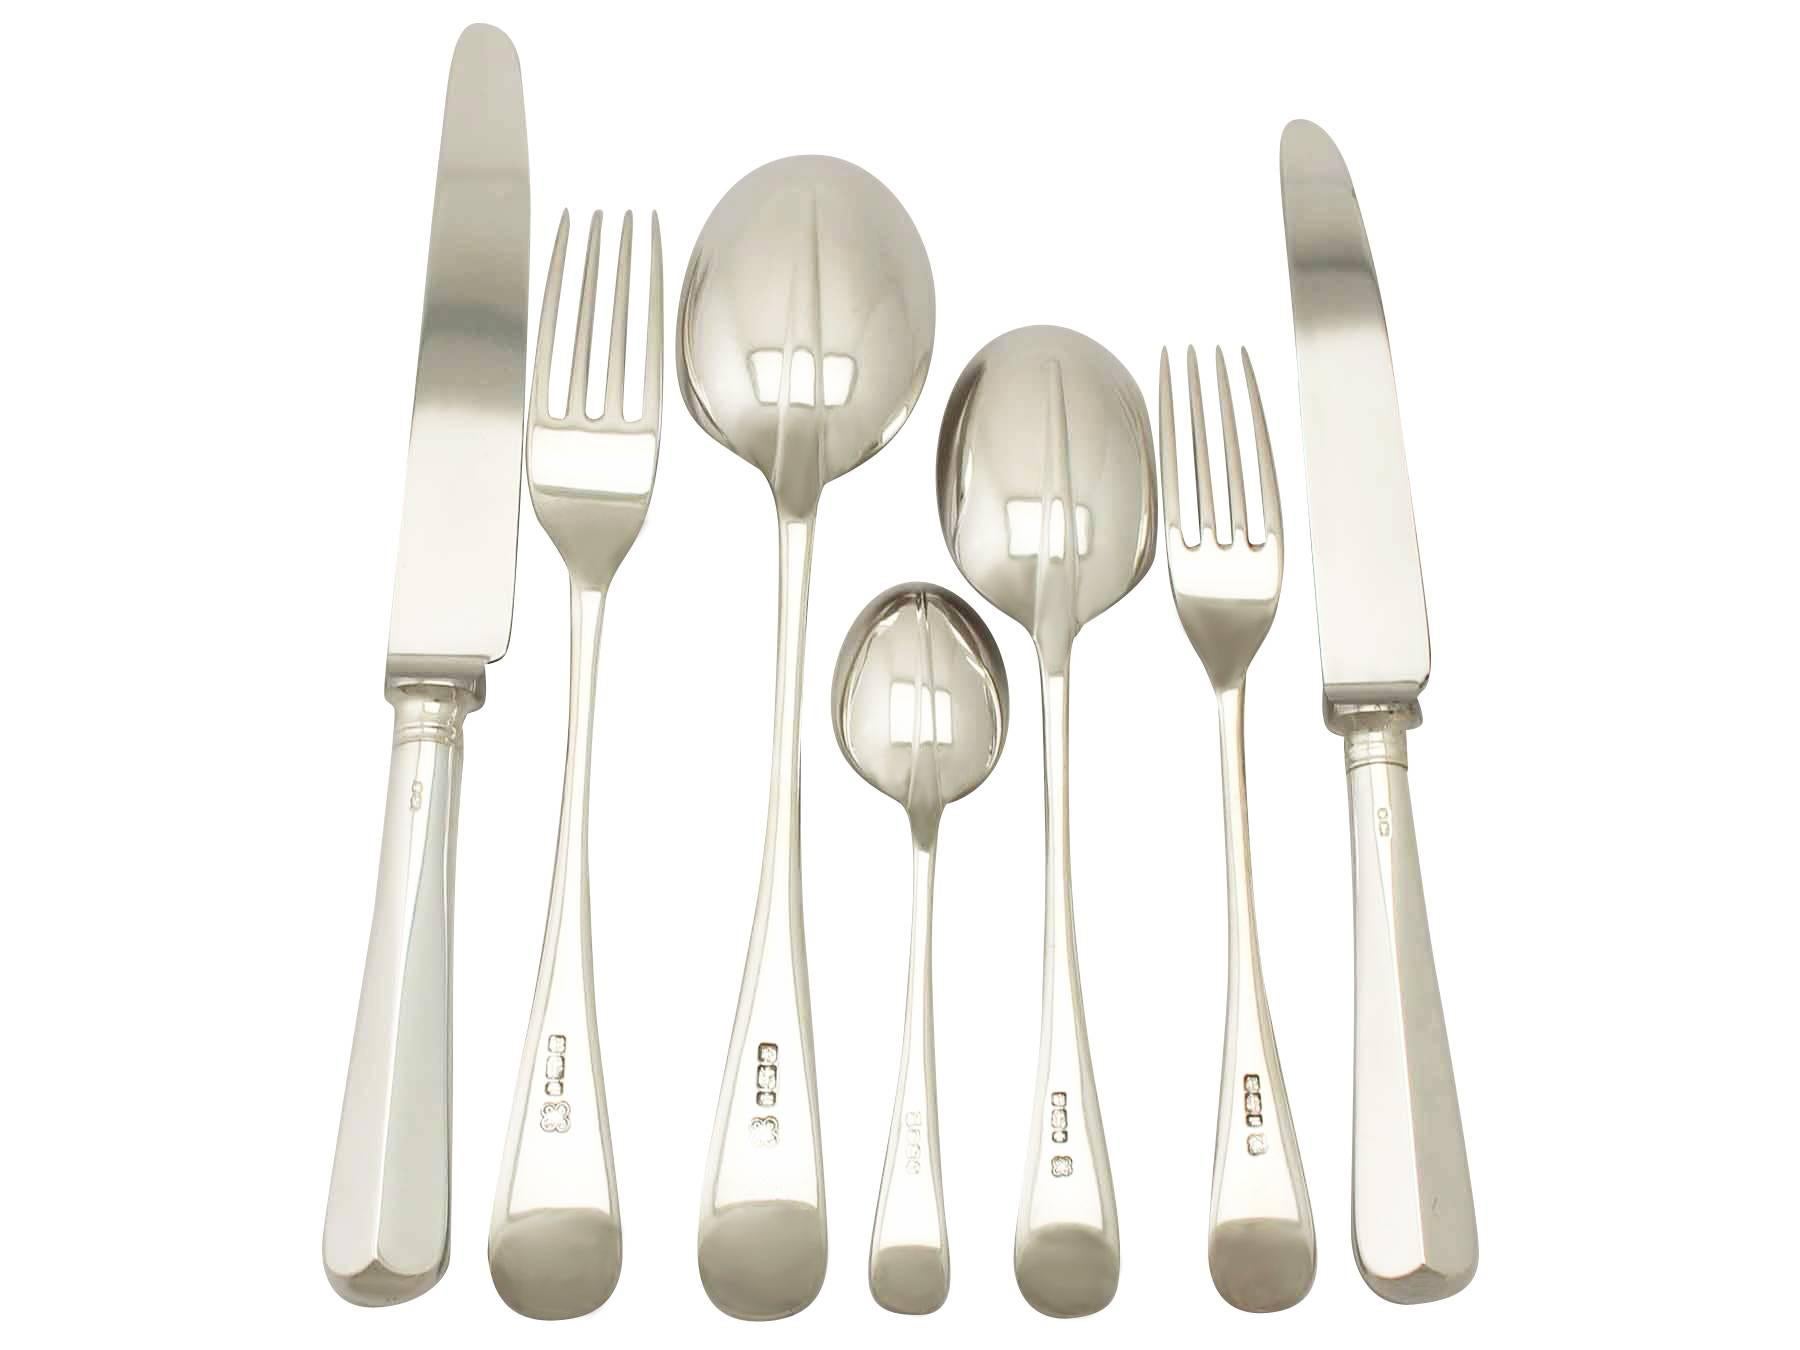 An exceptional, fine and impressive antique Edwardian English sterling silver straight Hanoverian Rat Tail pattern canteen of cutlery for ten persons; an addition to our antique flatware sets

The pieces of this exceptional antique Edwardian